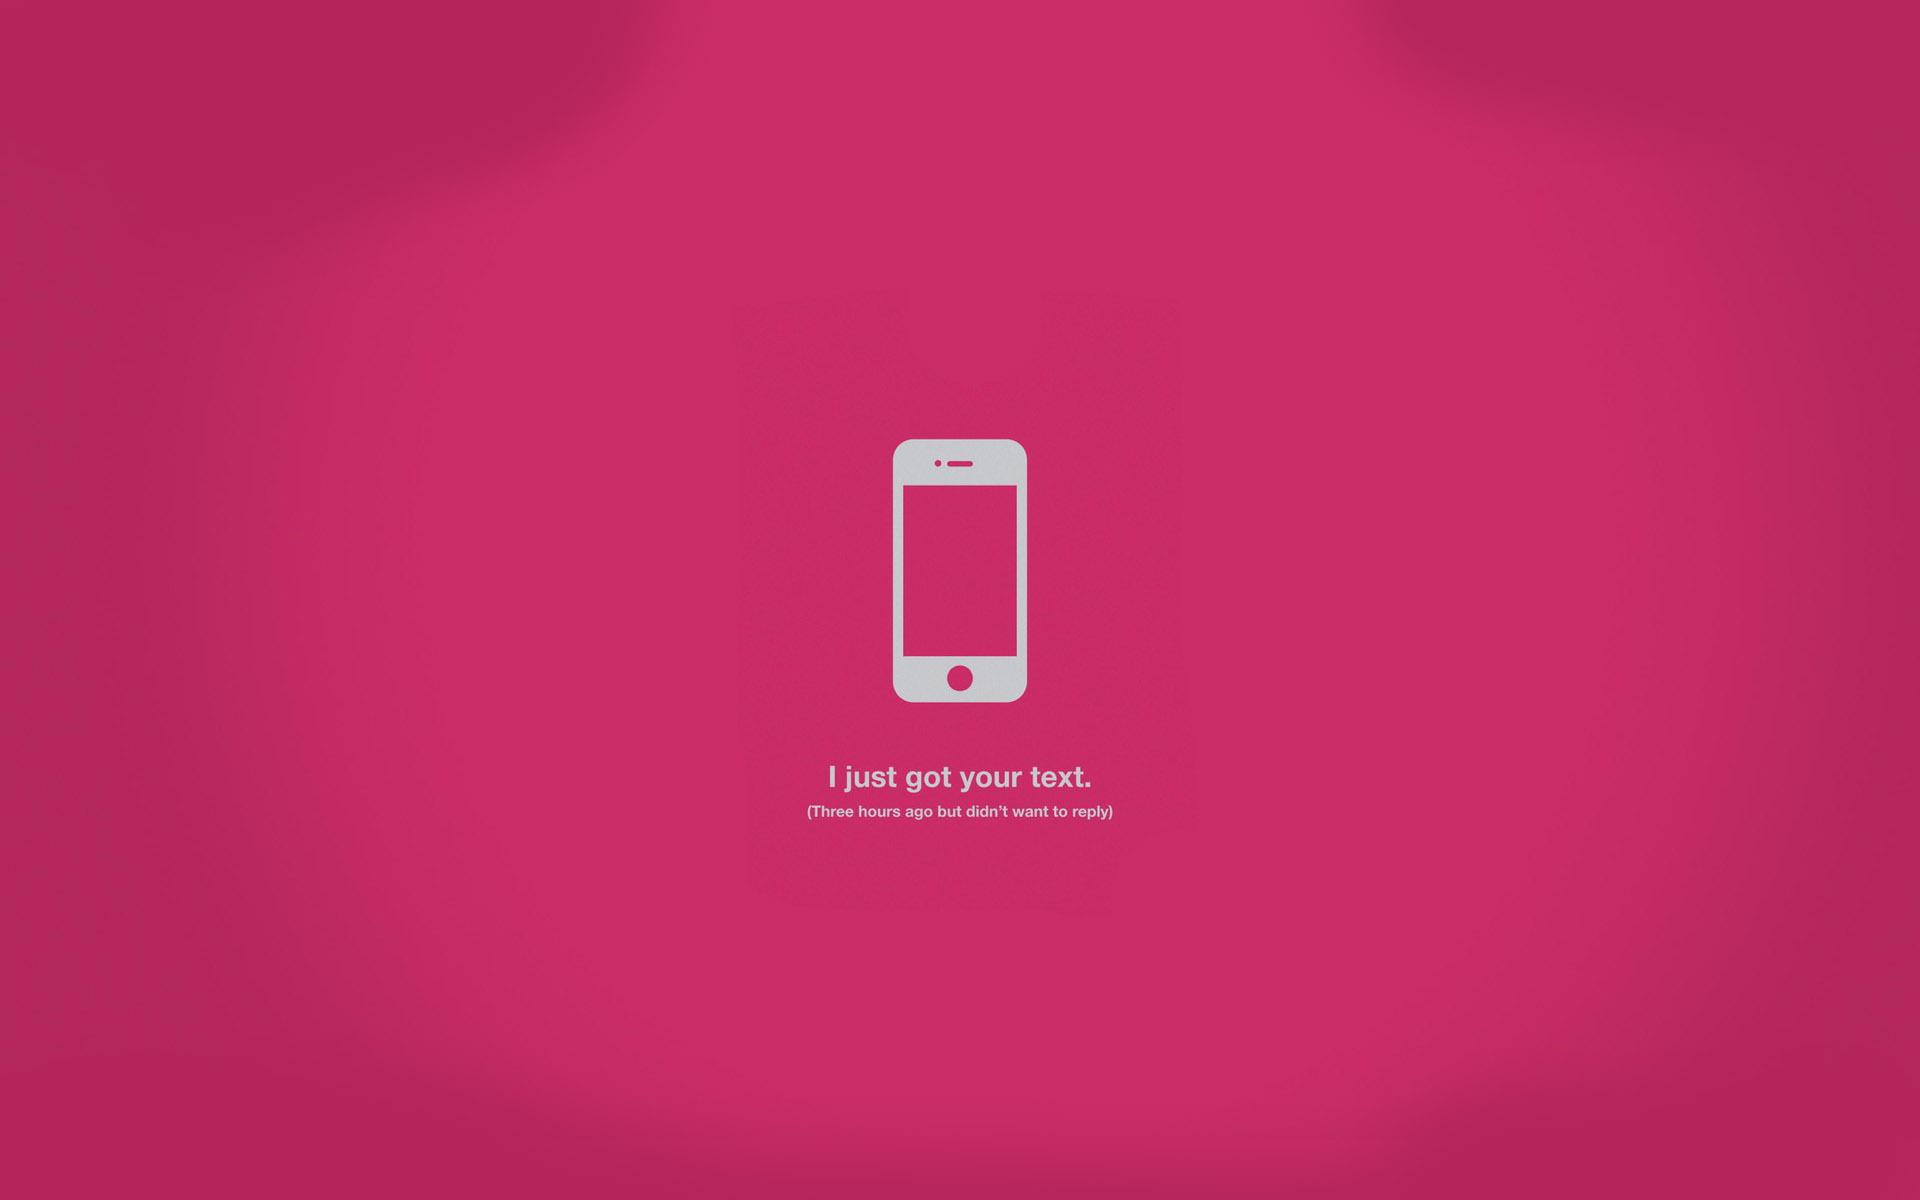 Wallpaper for Text Messages